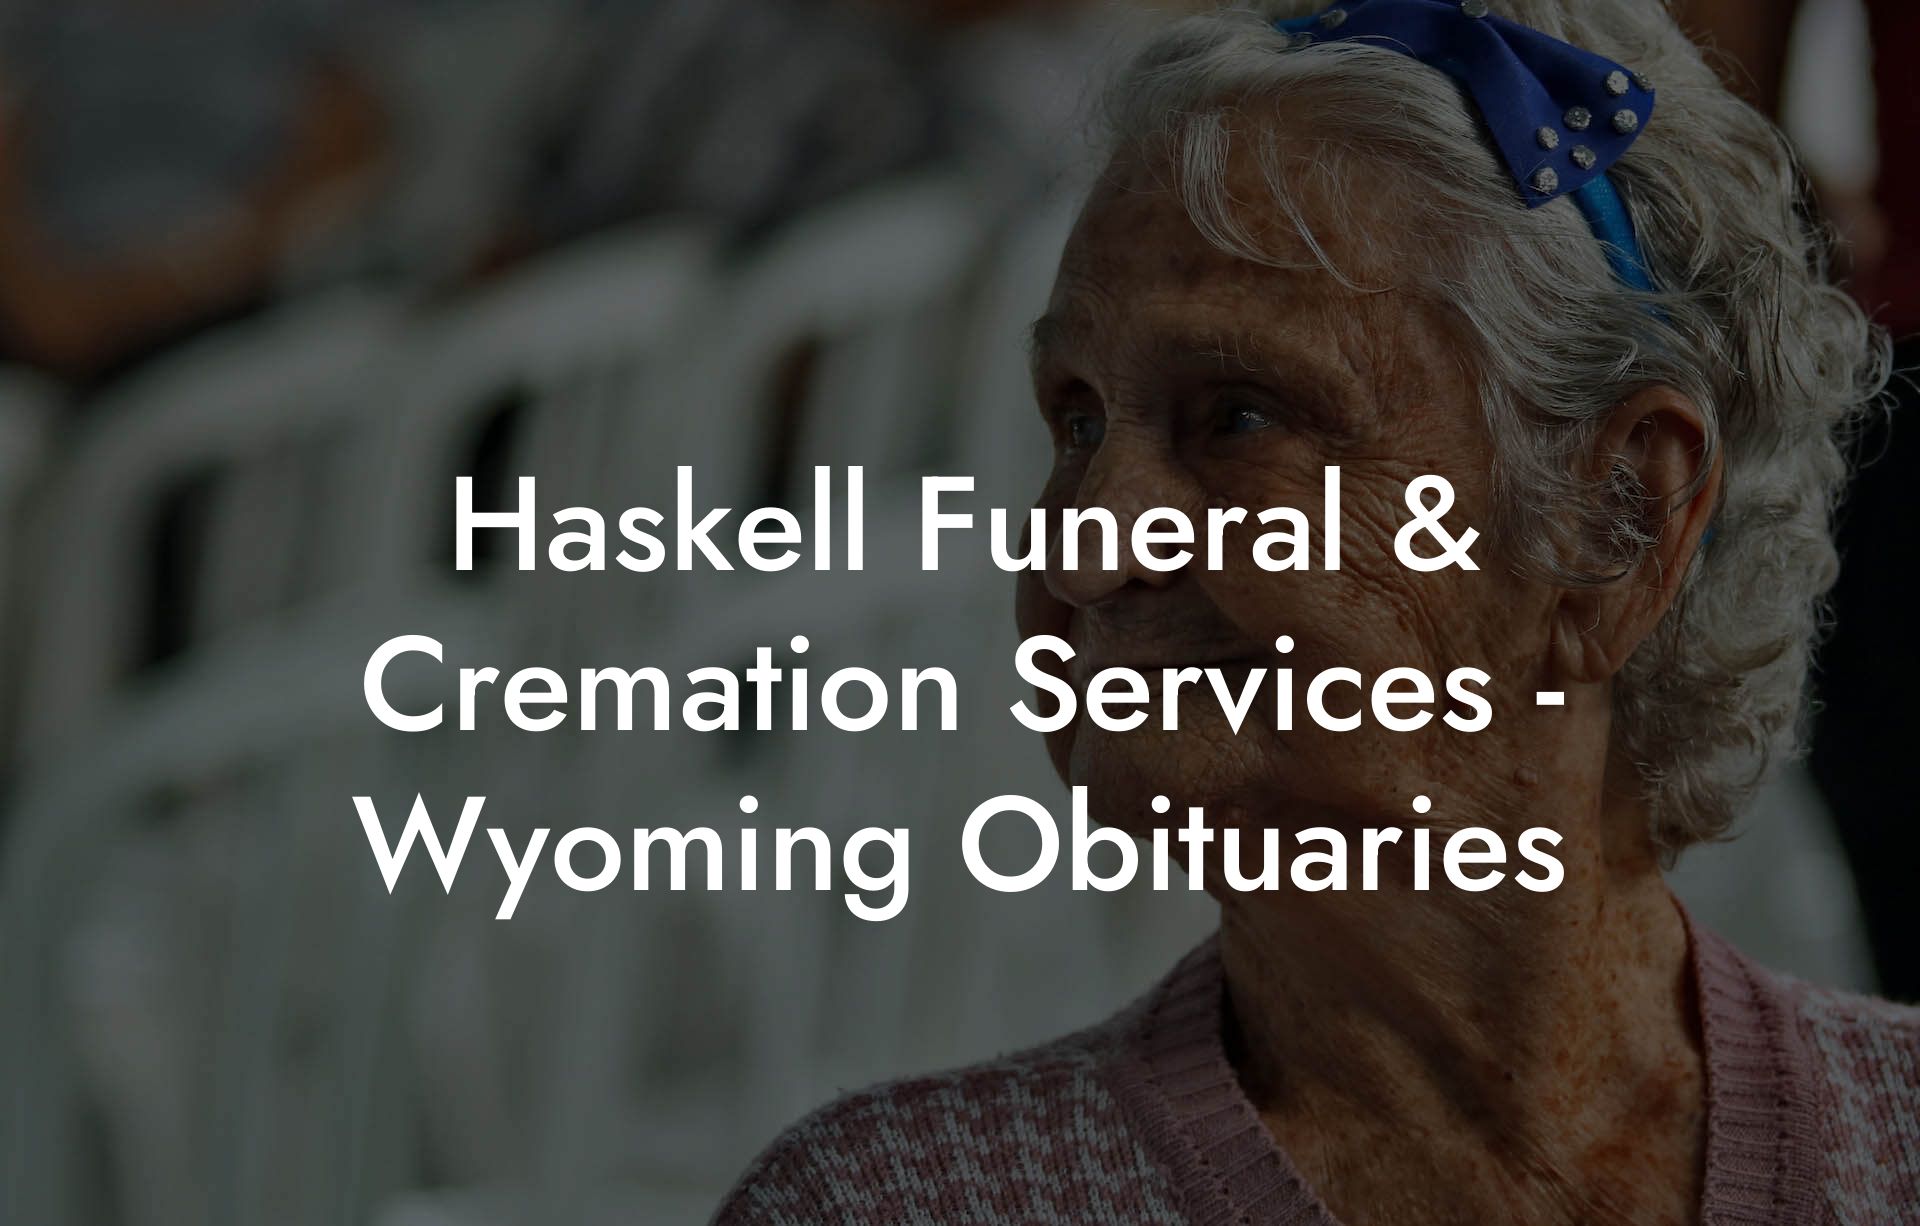 Haskell Funeral & Cremation Services - Wyoming Obituaries